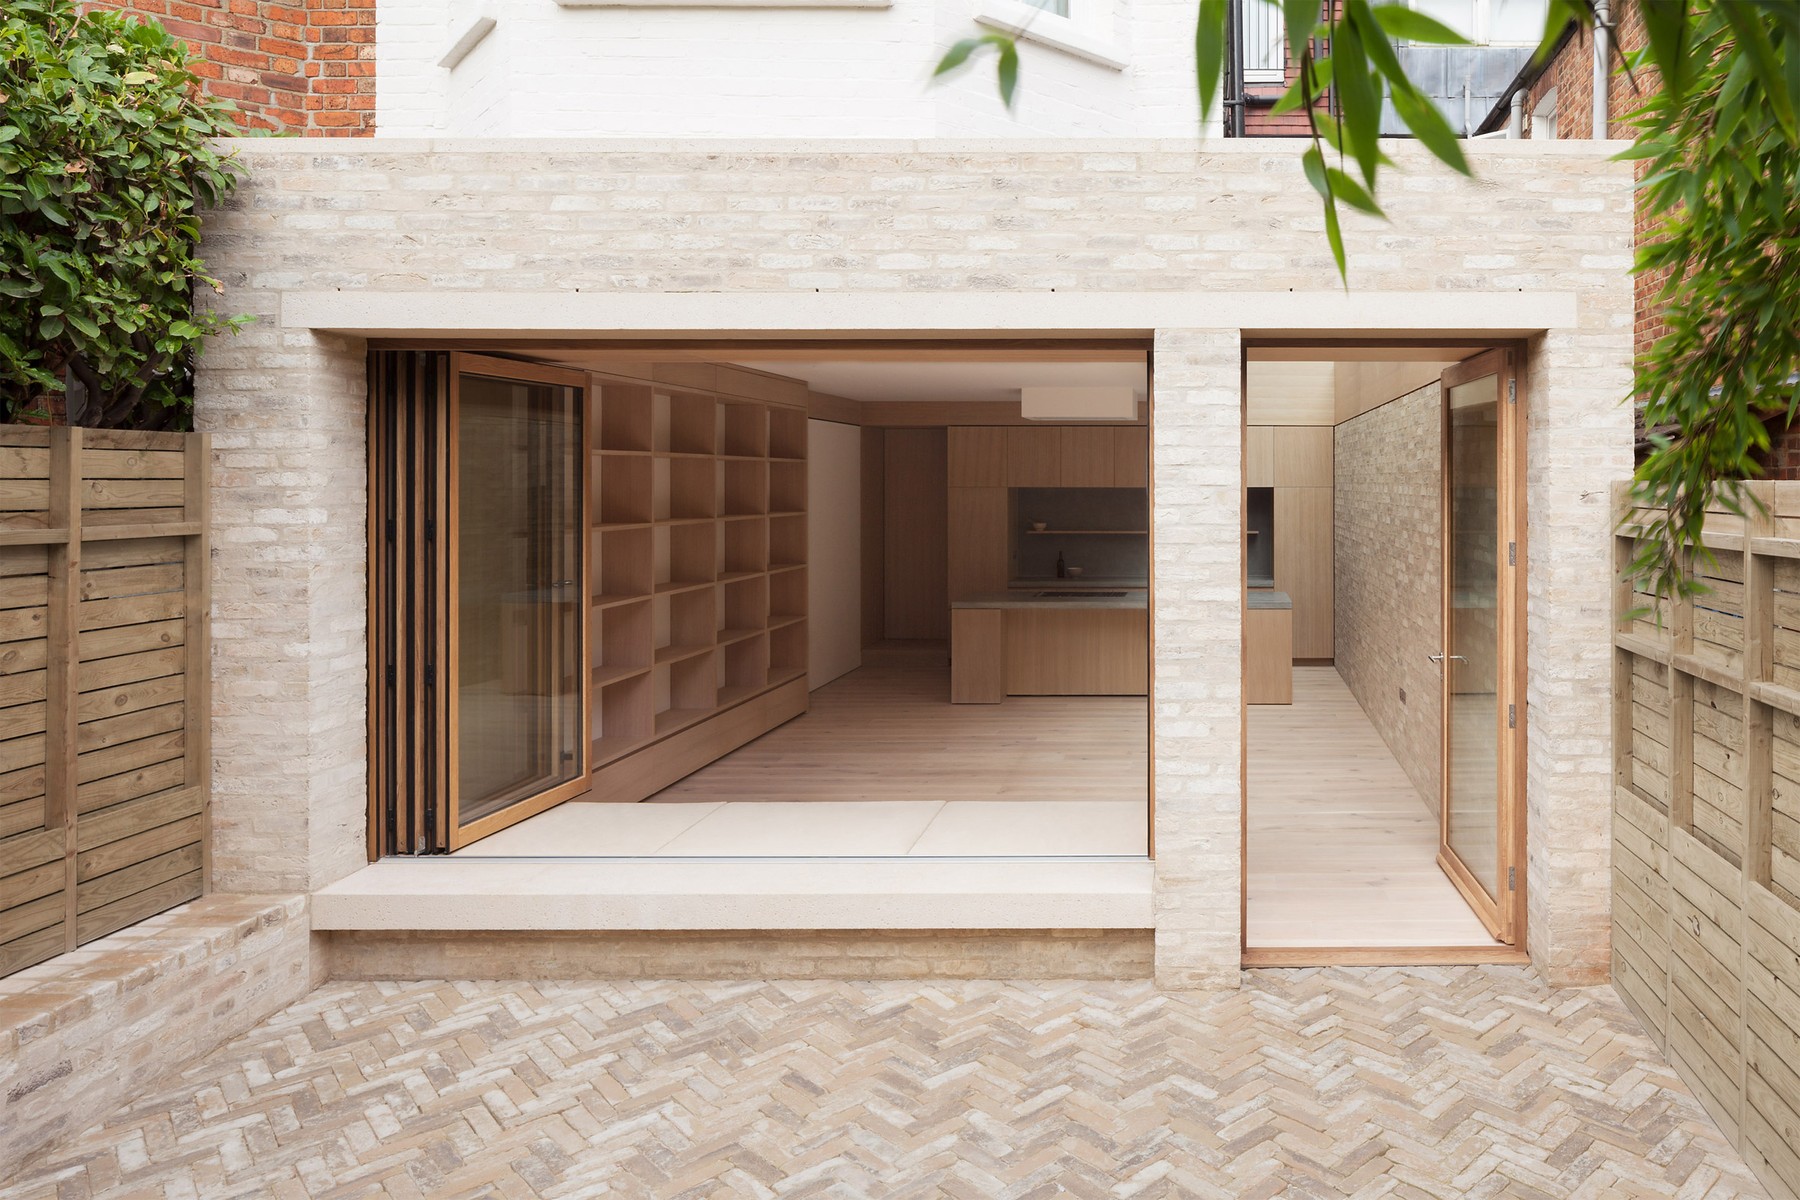 harvey-road-crouch-end-london-erbar-mattes-residential-architecture-extension_dezeen_2364_col_0-2.jpg